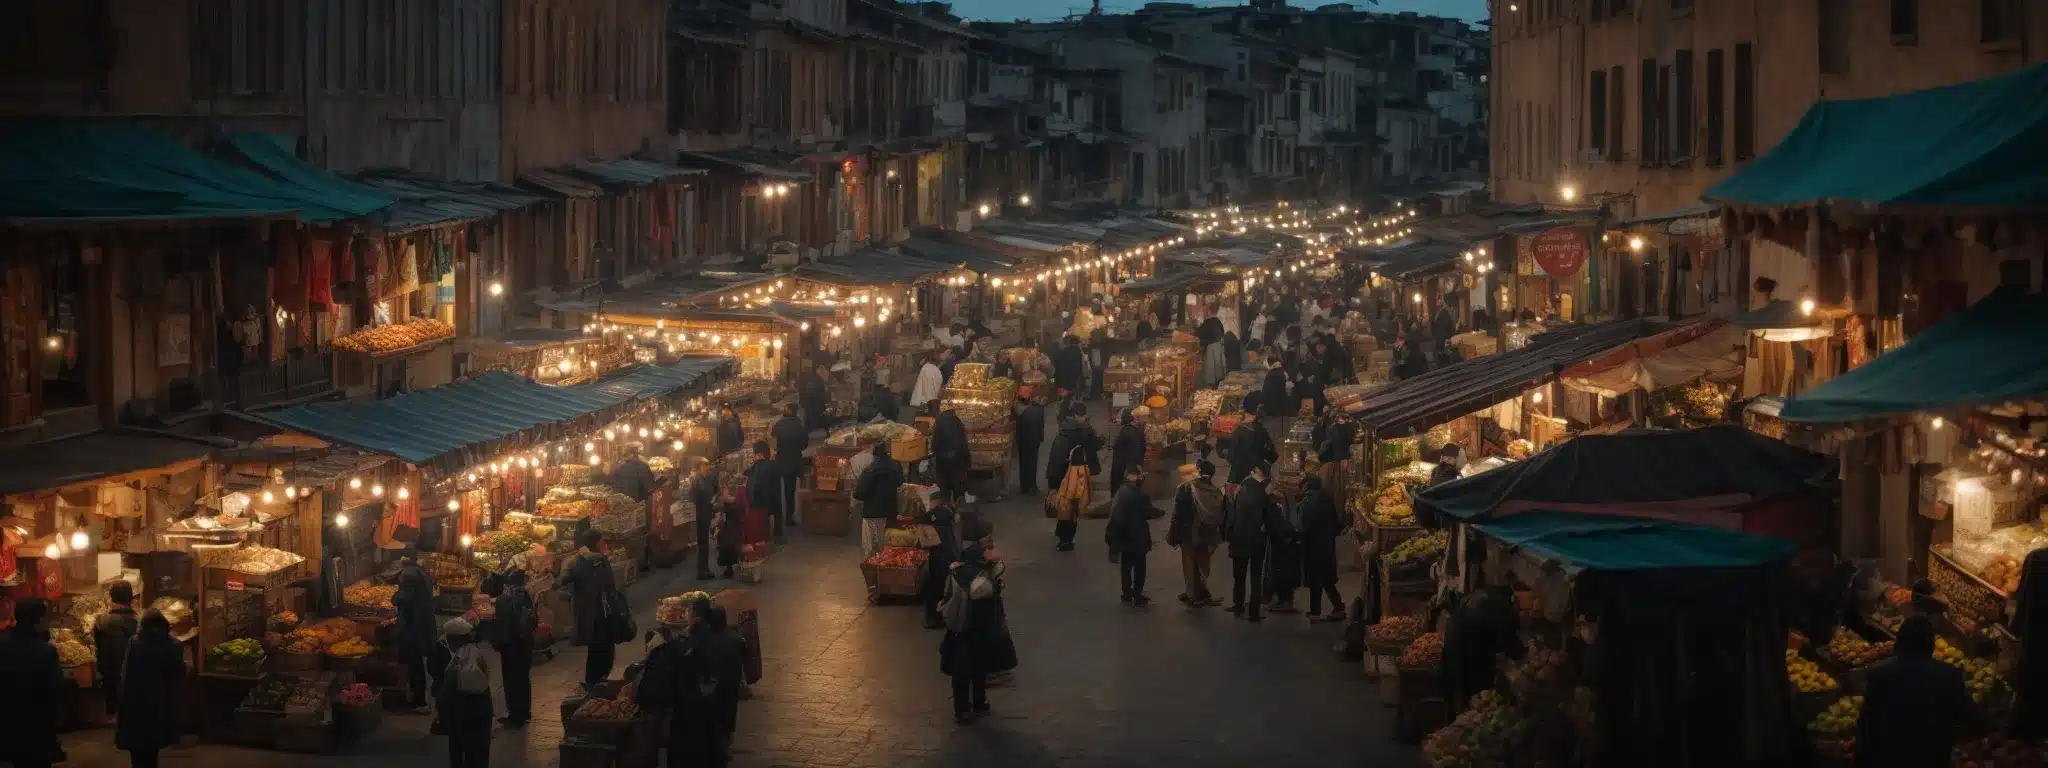 A Bustling Local Marketplace With Various Storefronts Illuminated By Spotlights At Dusk.